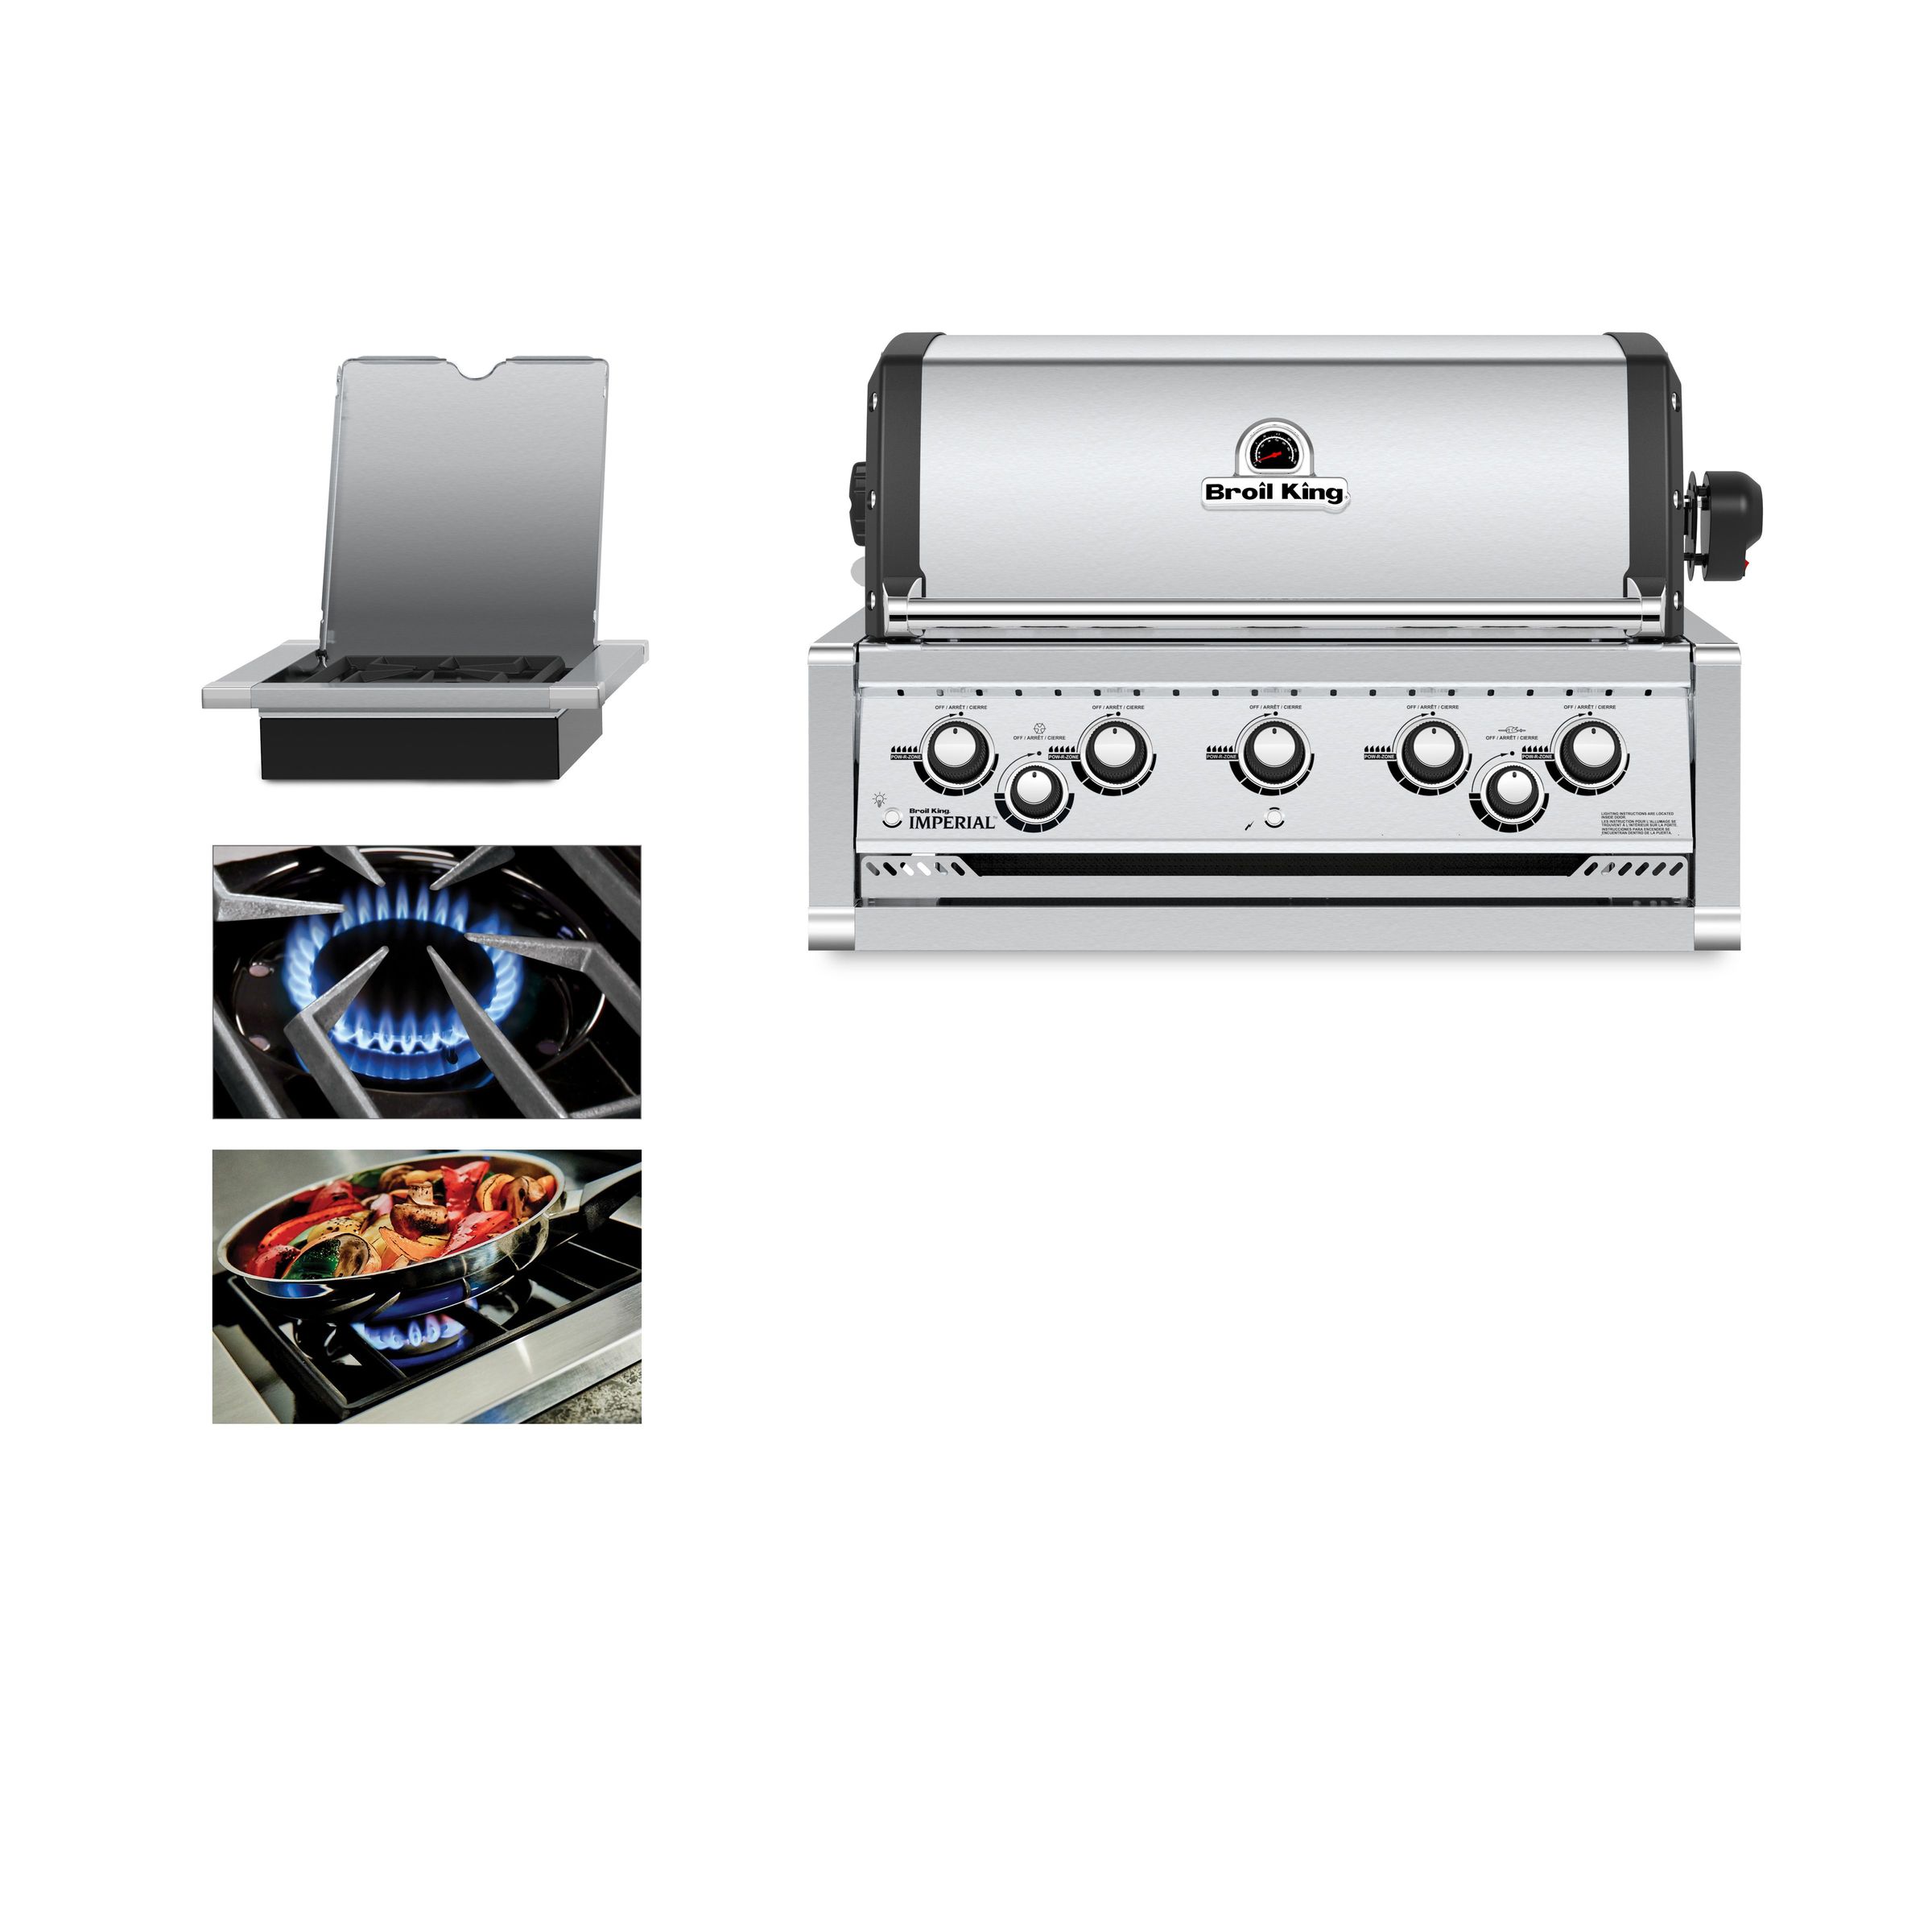 Bytte Blive Støt IMPERIAL™ S 490 BUILT-IN GRILL - Broil King